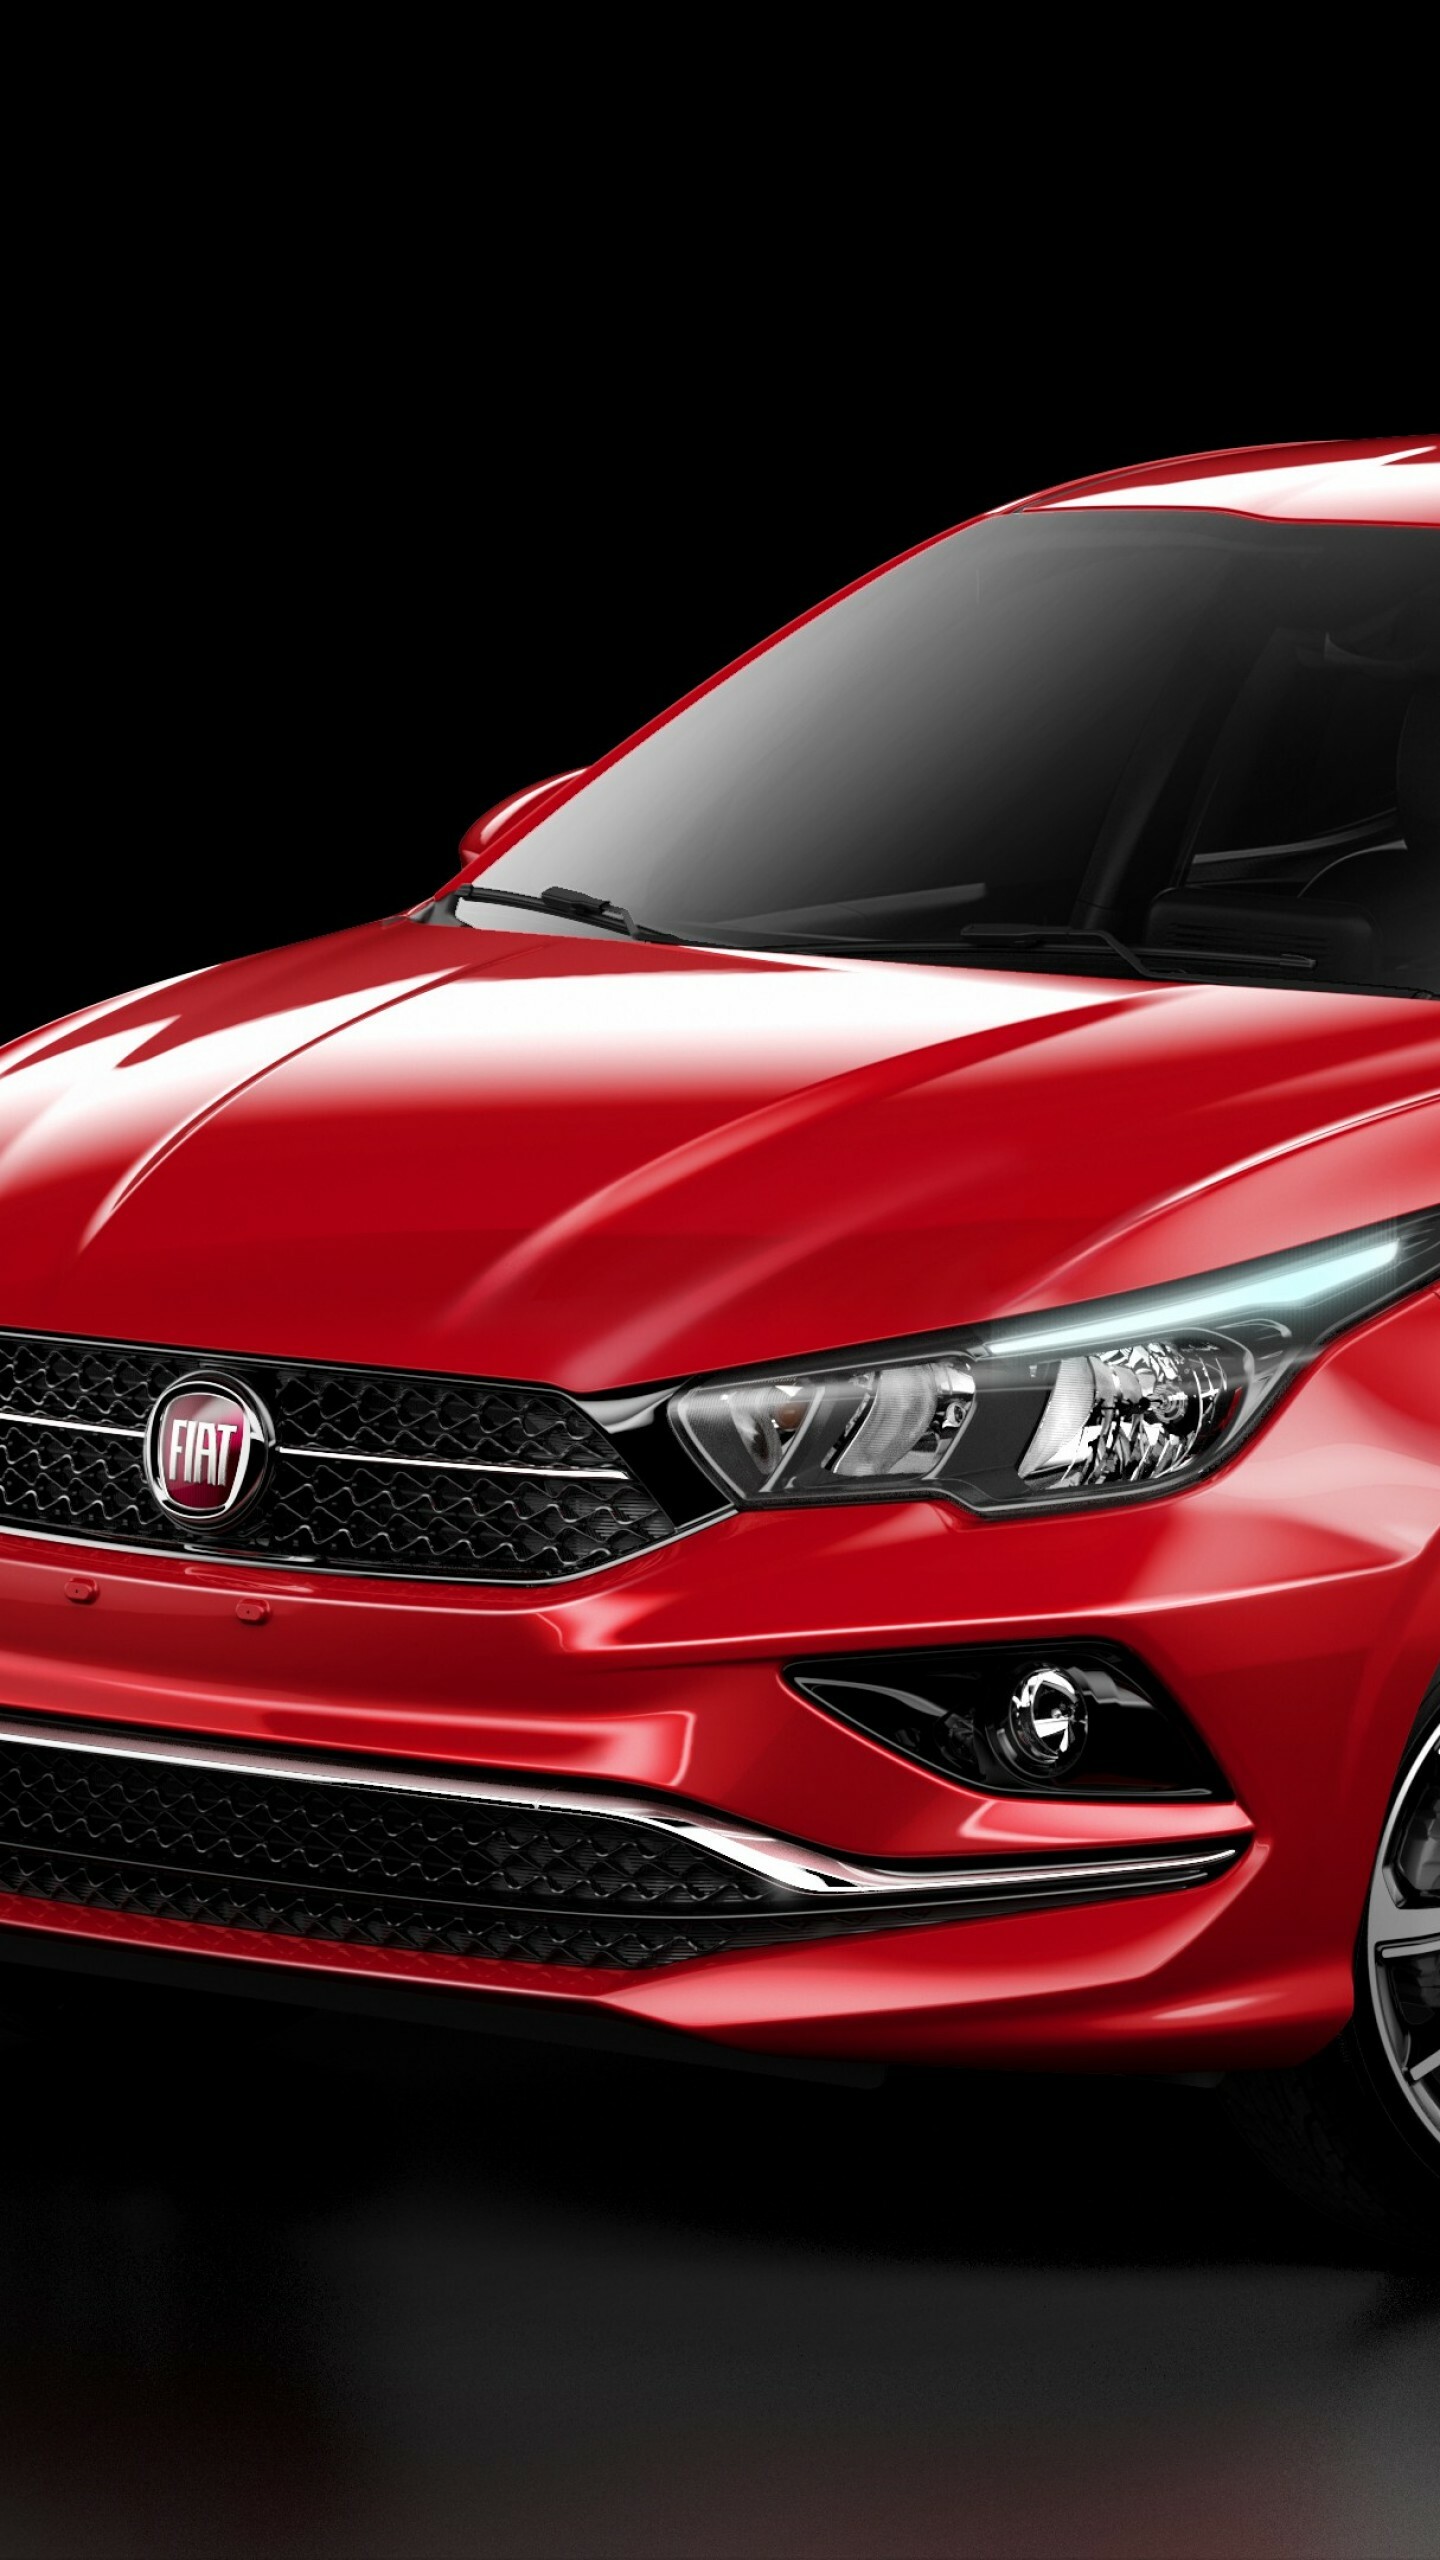 Fiat: Cronos, A subcompact car released in February 2018 by the Italian automaker. 1440x2560 HD Background.